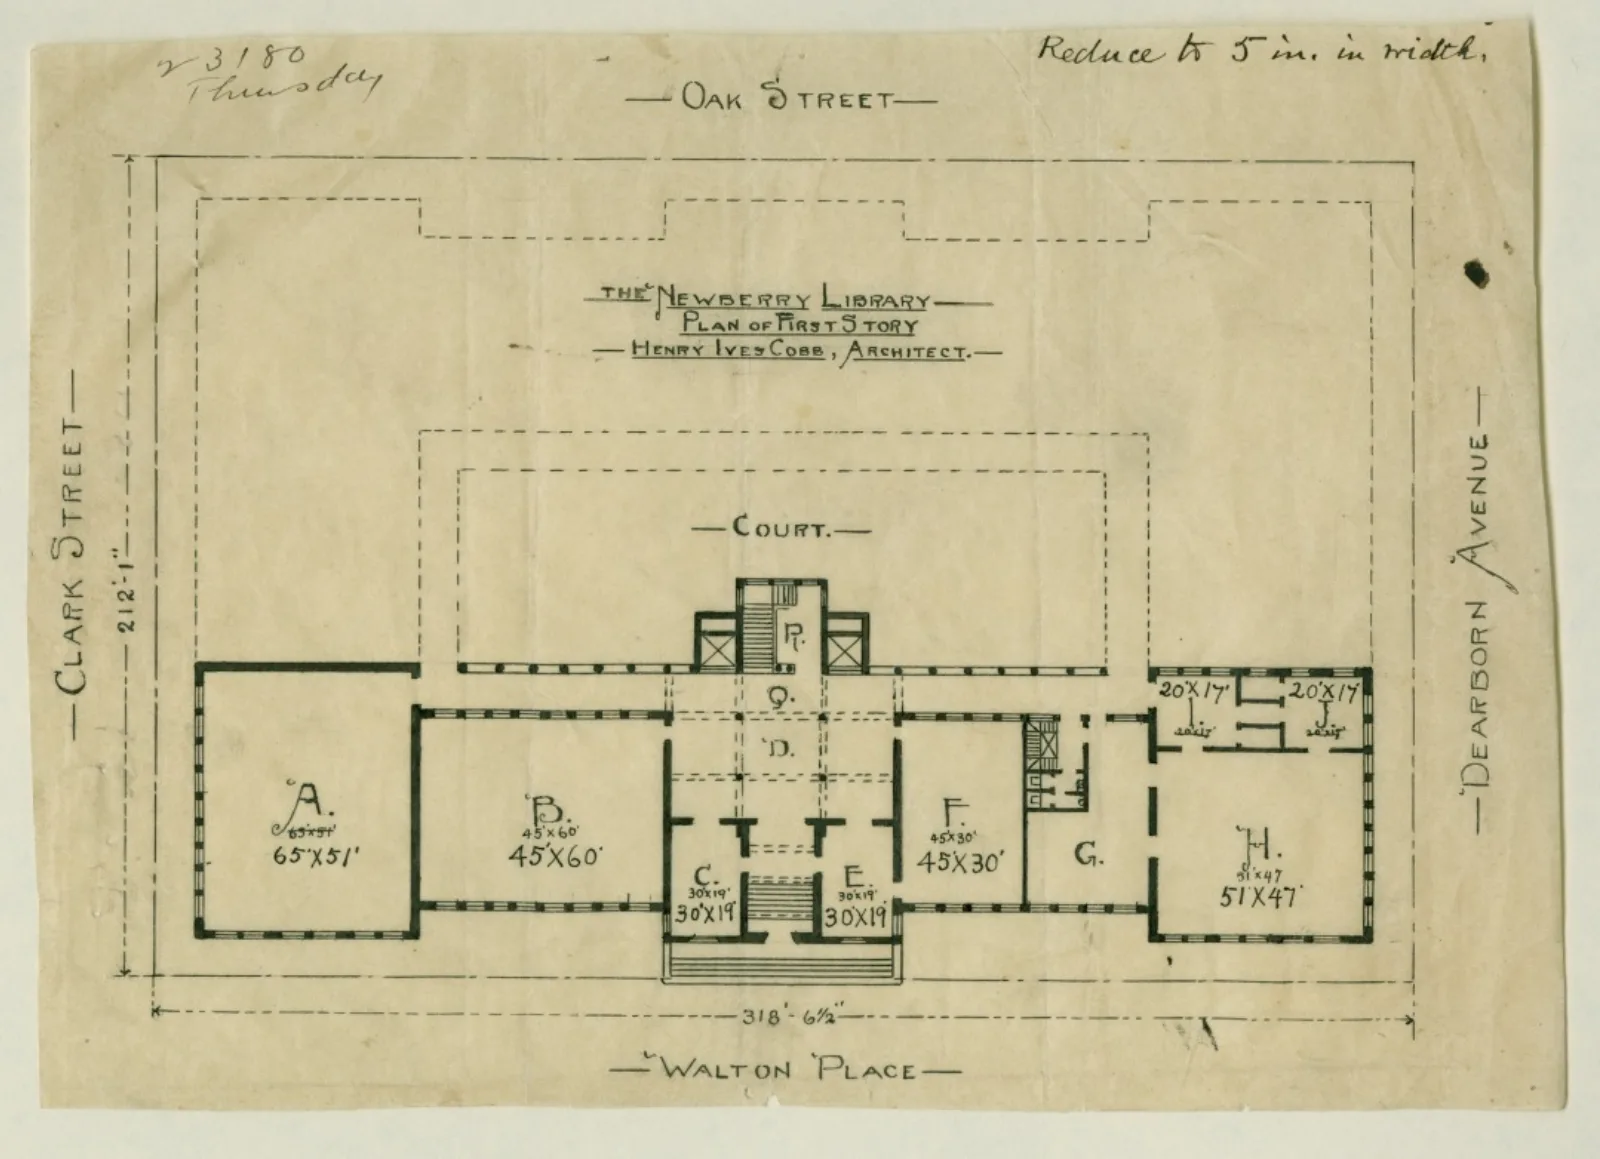 A blueprint shows the outline of the Newberry building with additional outlines showing what a future addition to the building might look like.